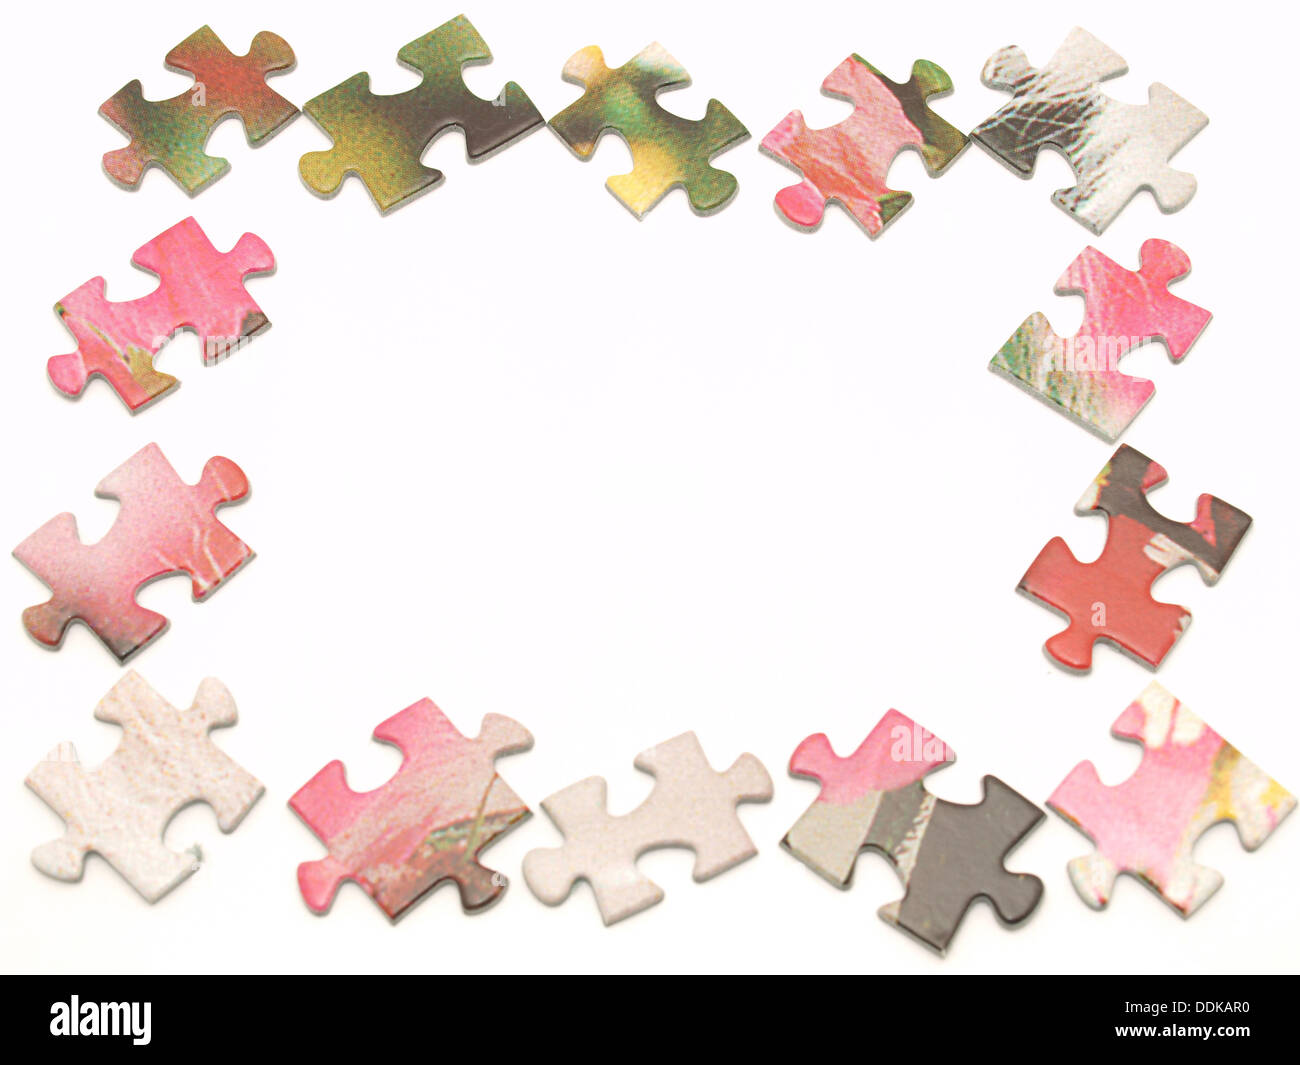 Puzzle pieces on a white background Stock Photo